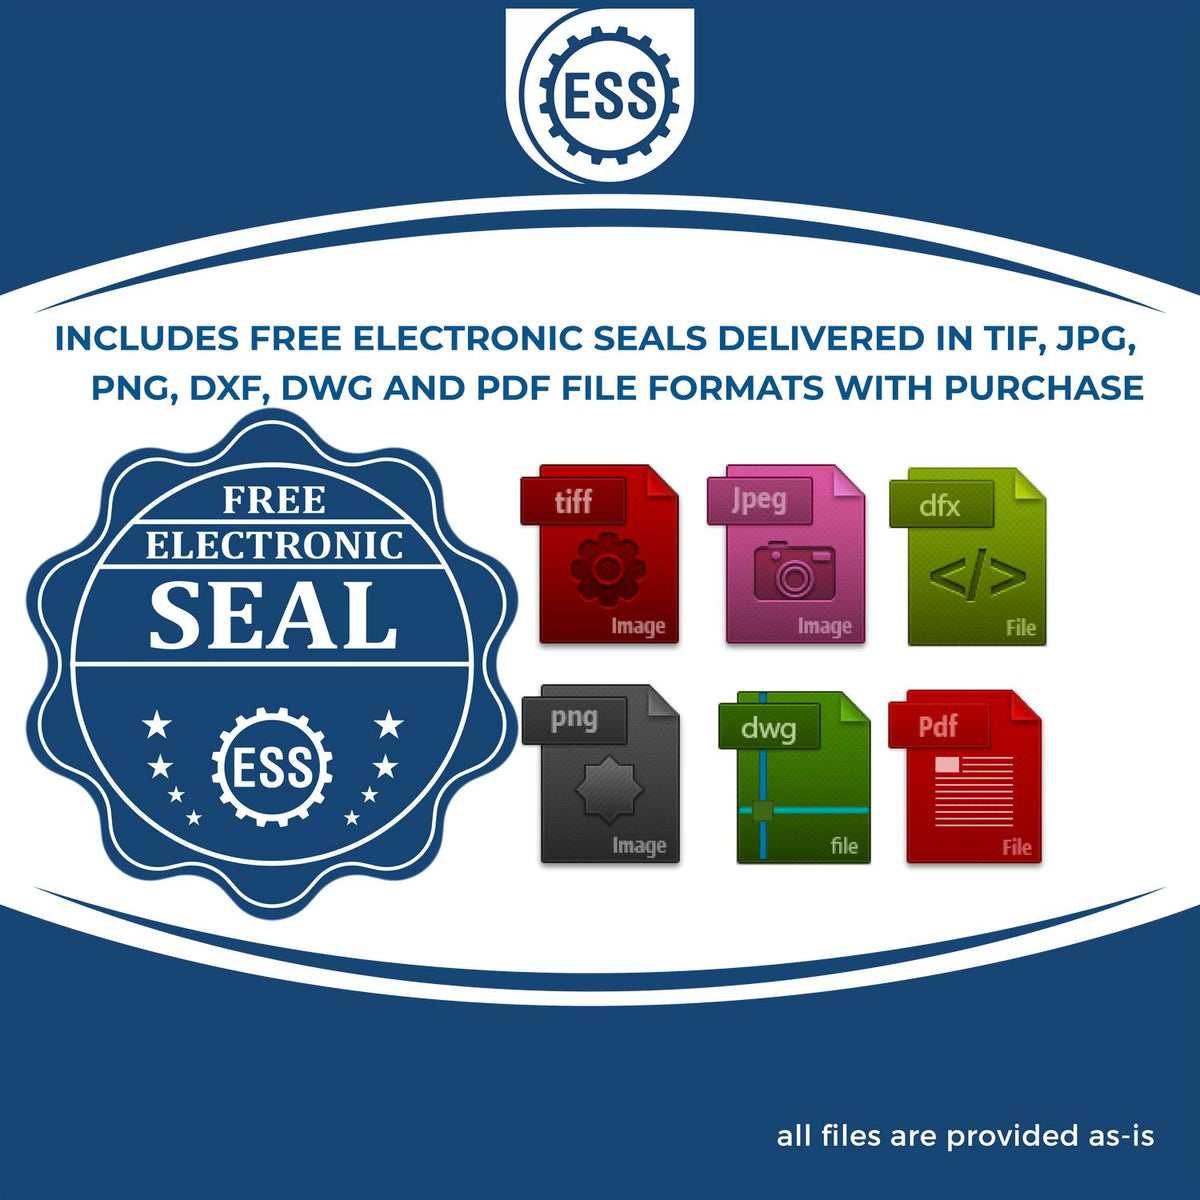 An infographic for the free electronic seal for the MaxLight Premium Pre-Inked Alaska State Seal Notarial Stamp illustrating the different file type icons such as DXF, DWG, TIF, JPG and PNG.